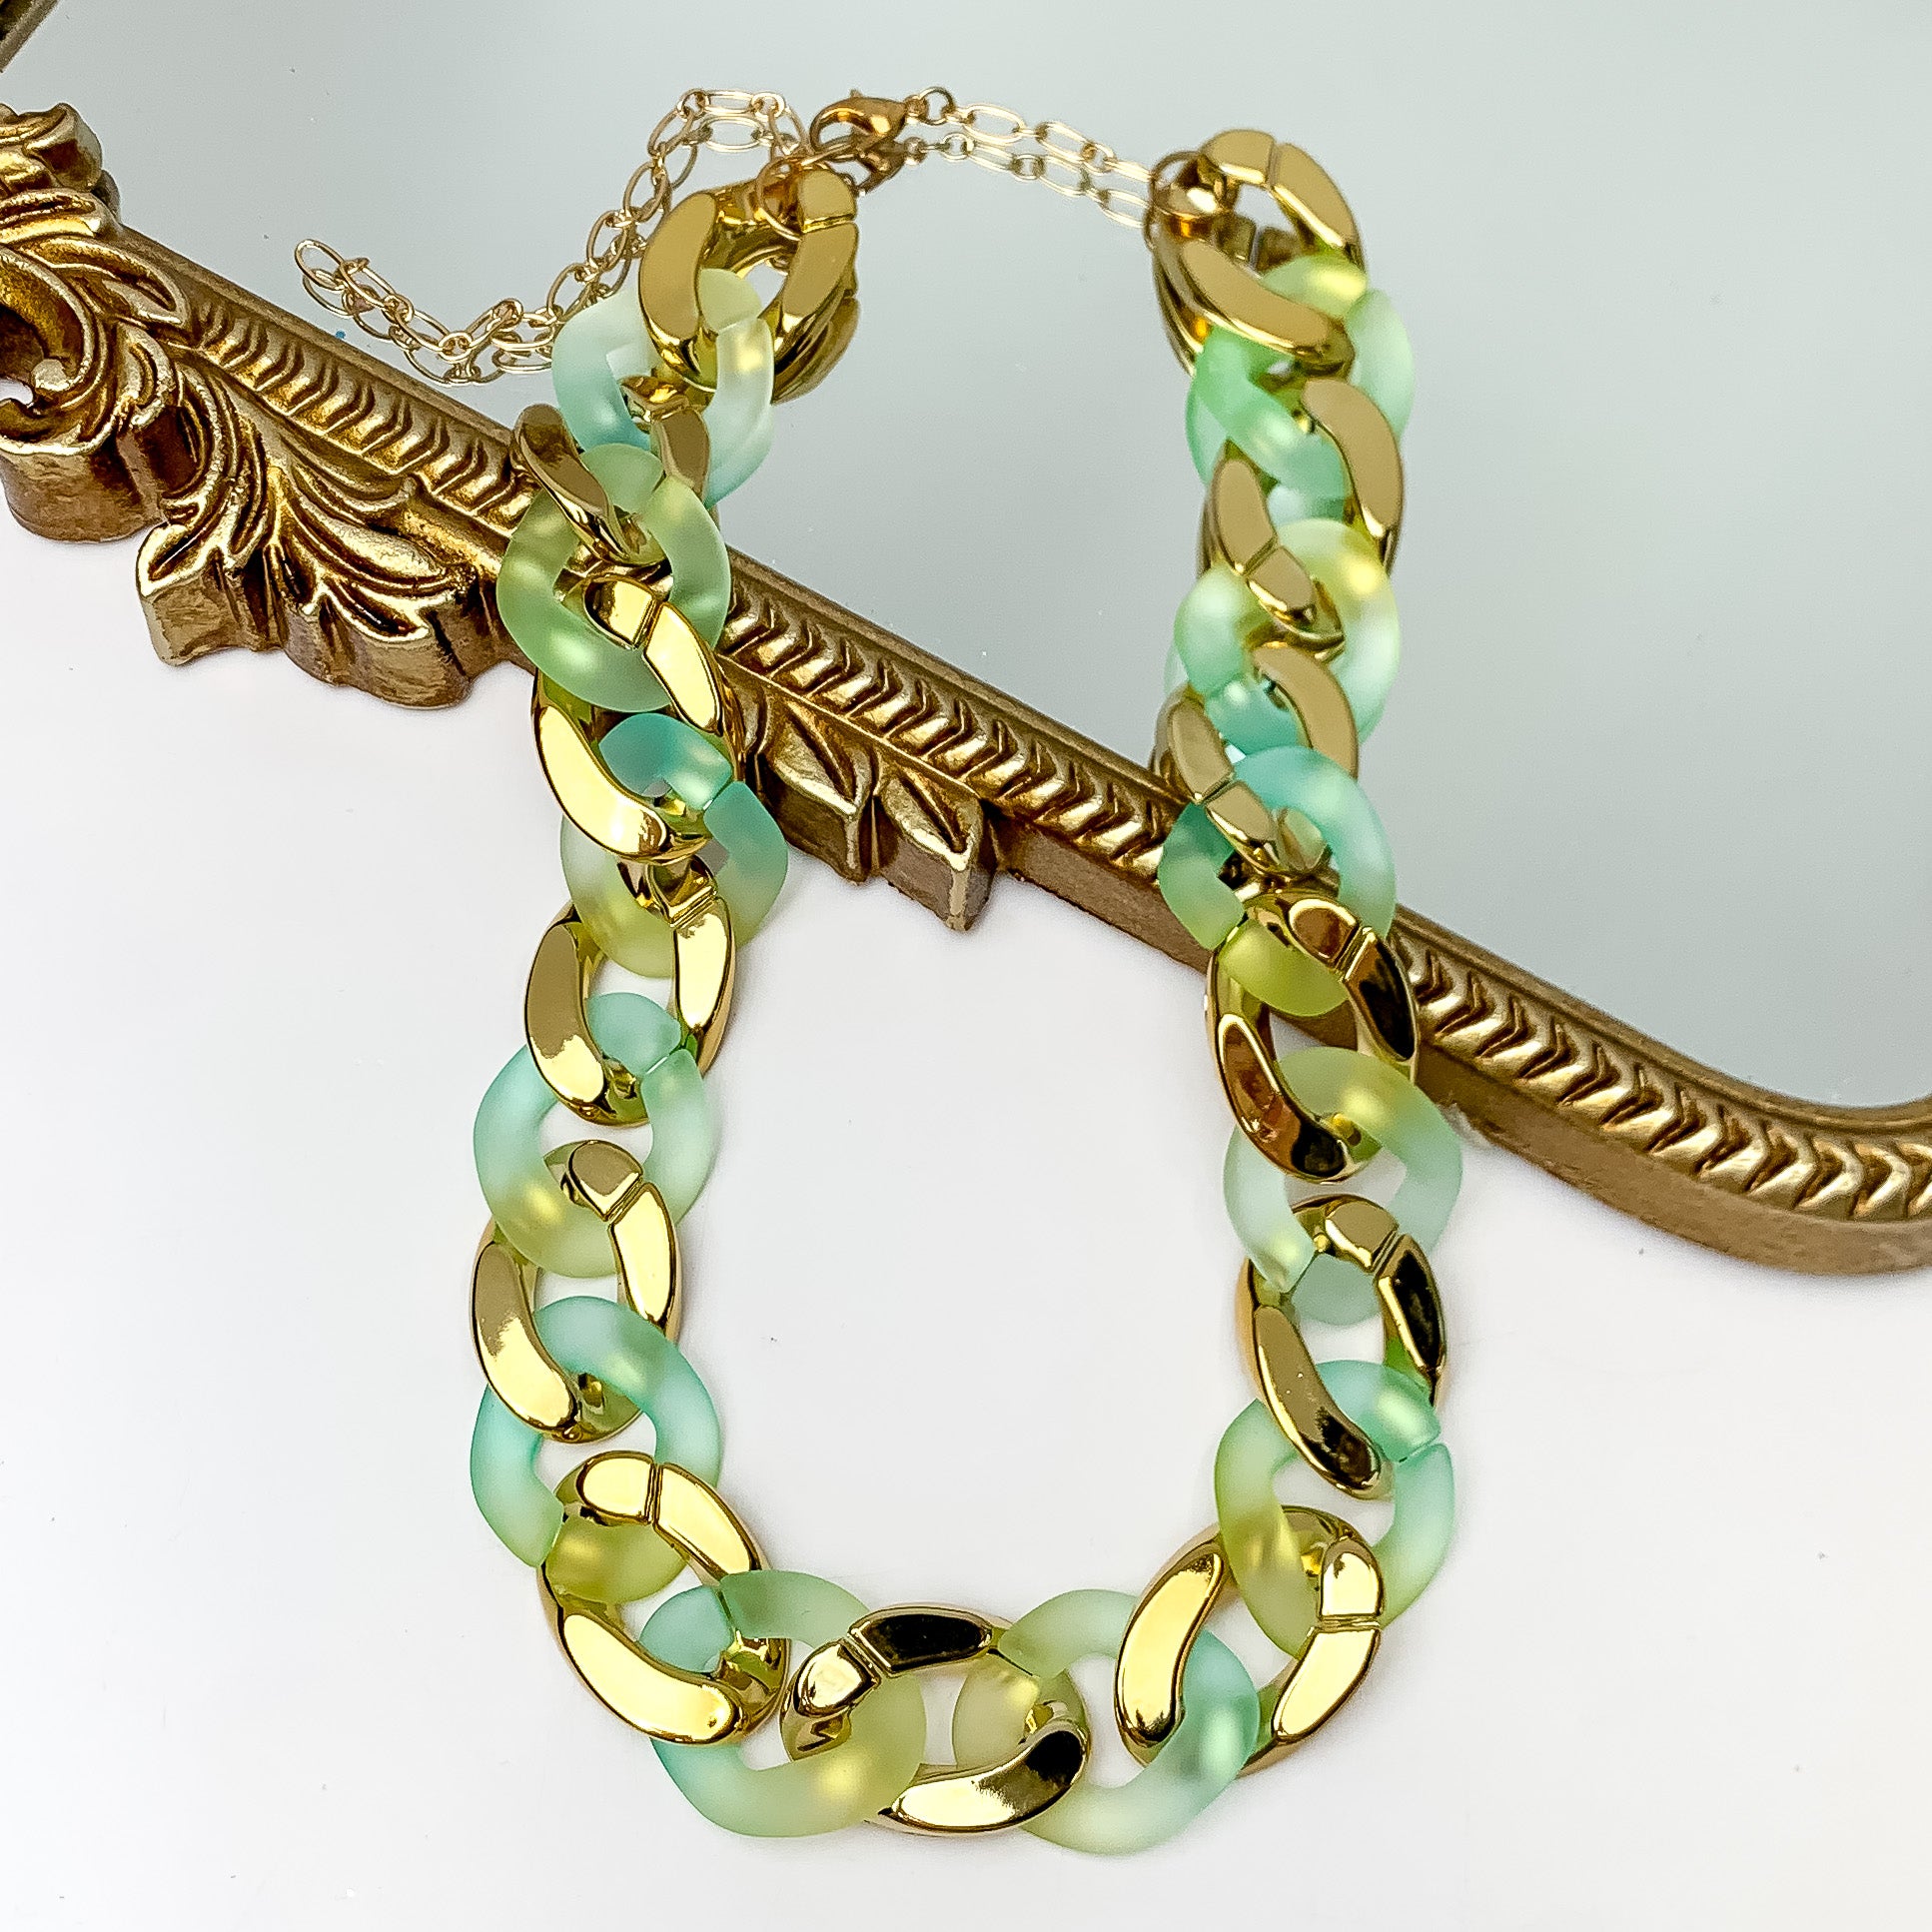 Pictured partially on a gold mirror on a white background is a chain link necklace in gold and green. 